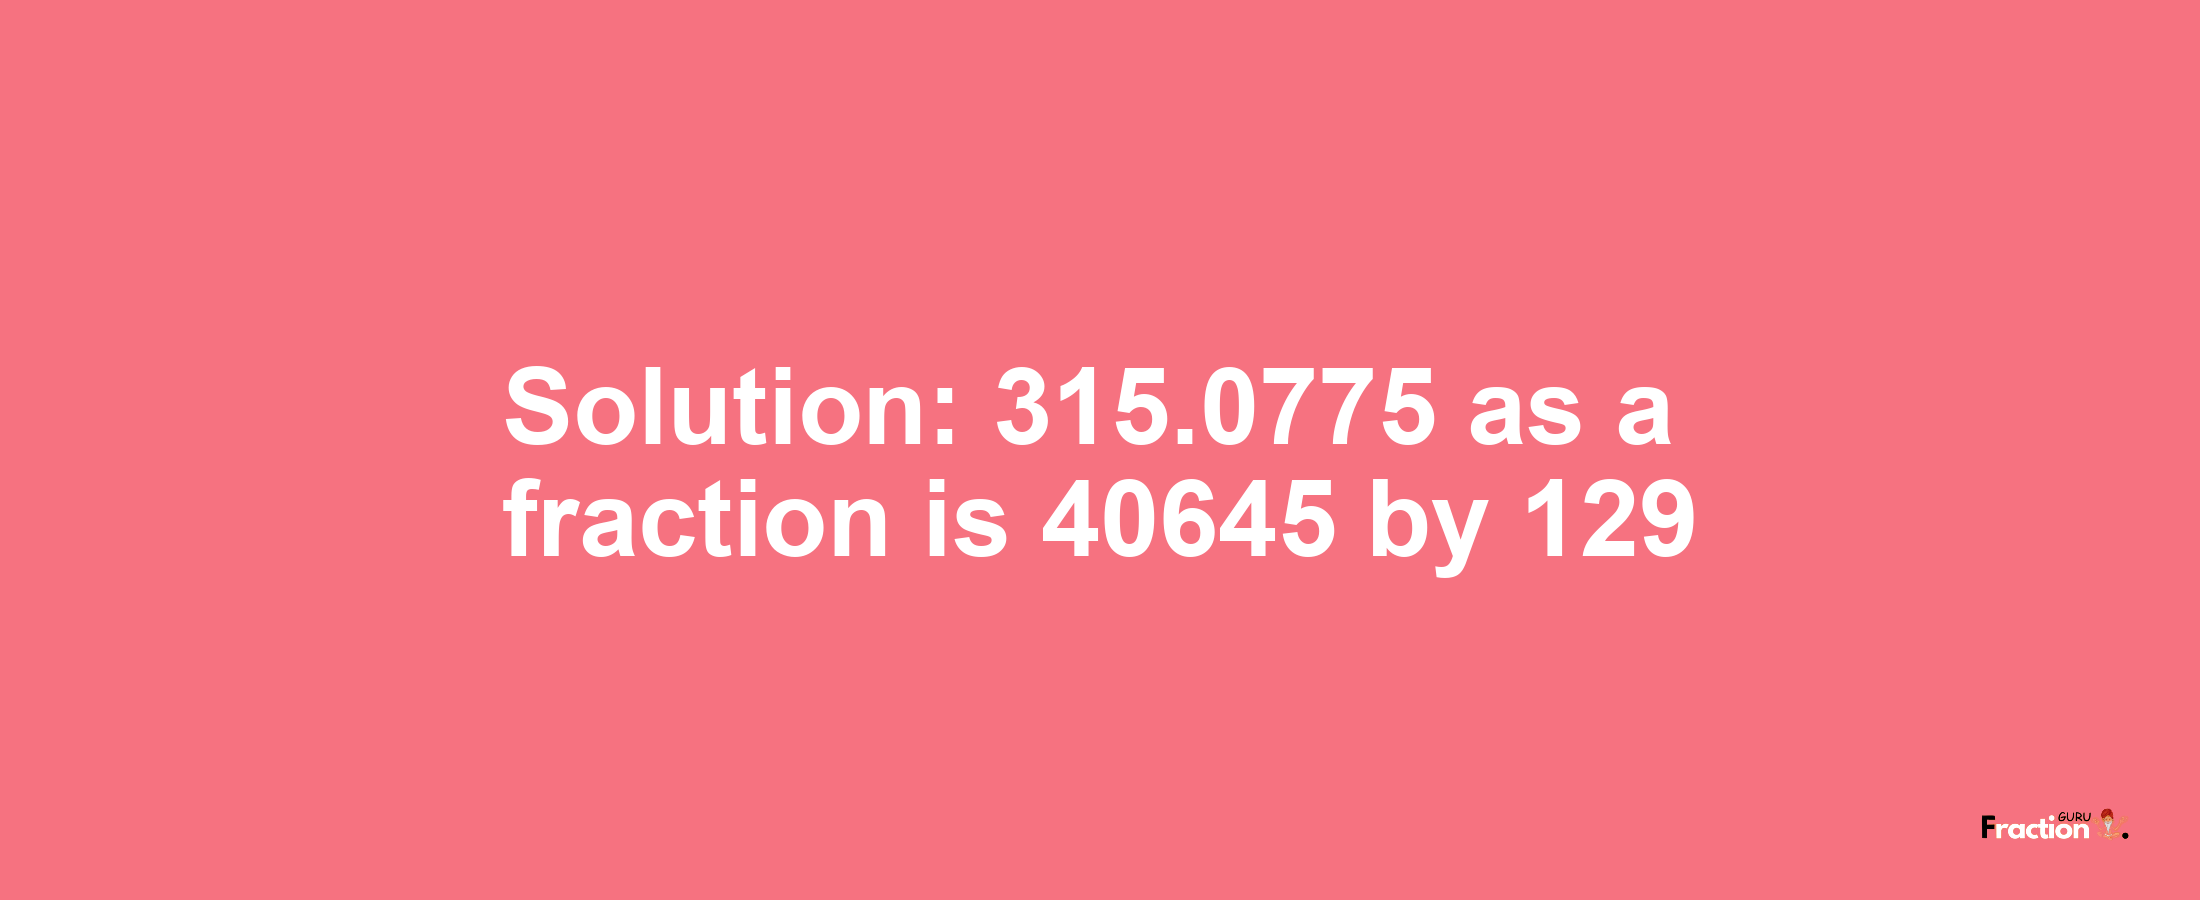 Solution:315.0775 as a fraction is 40645/129